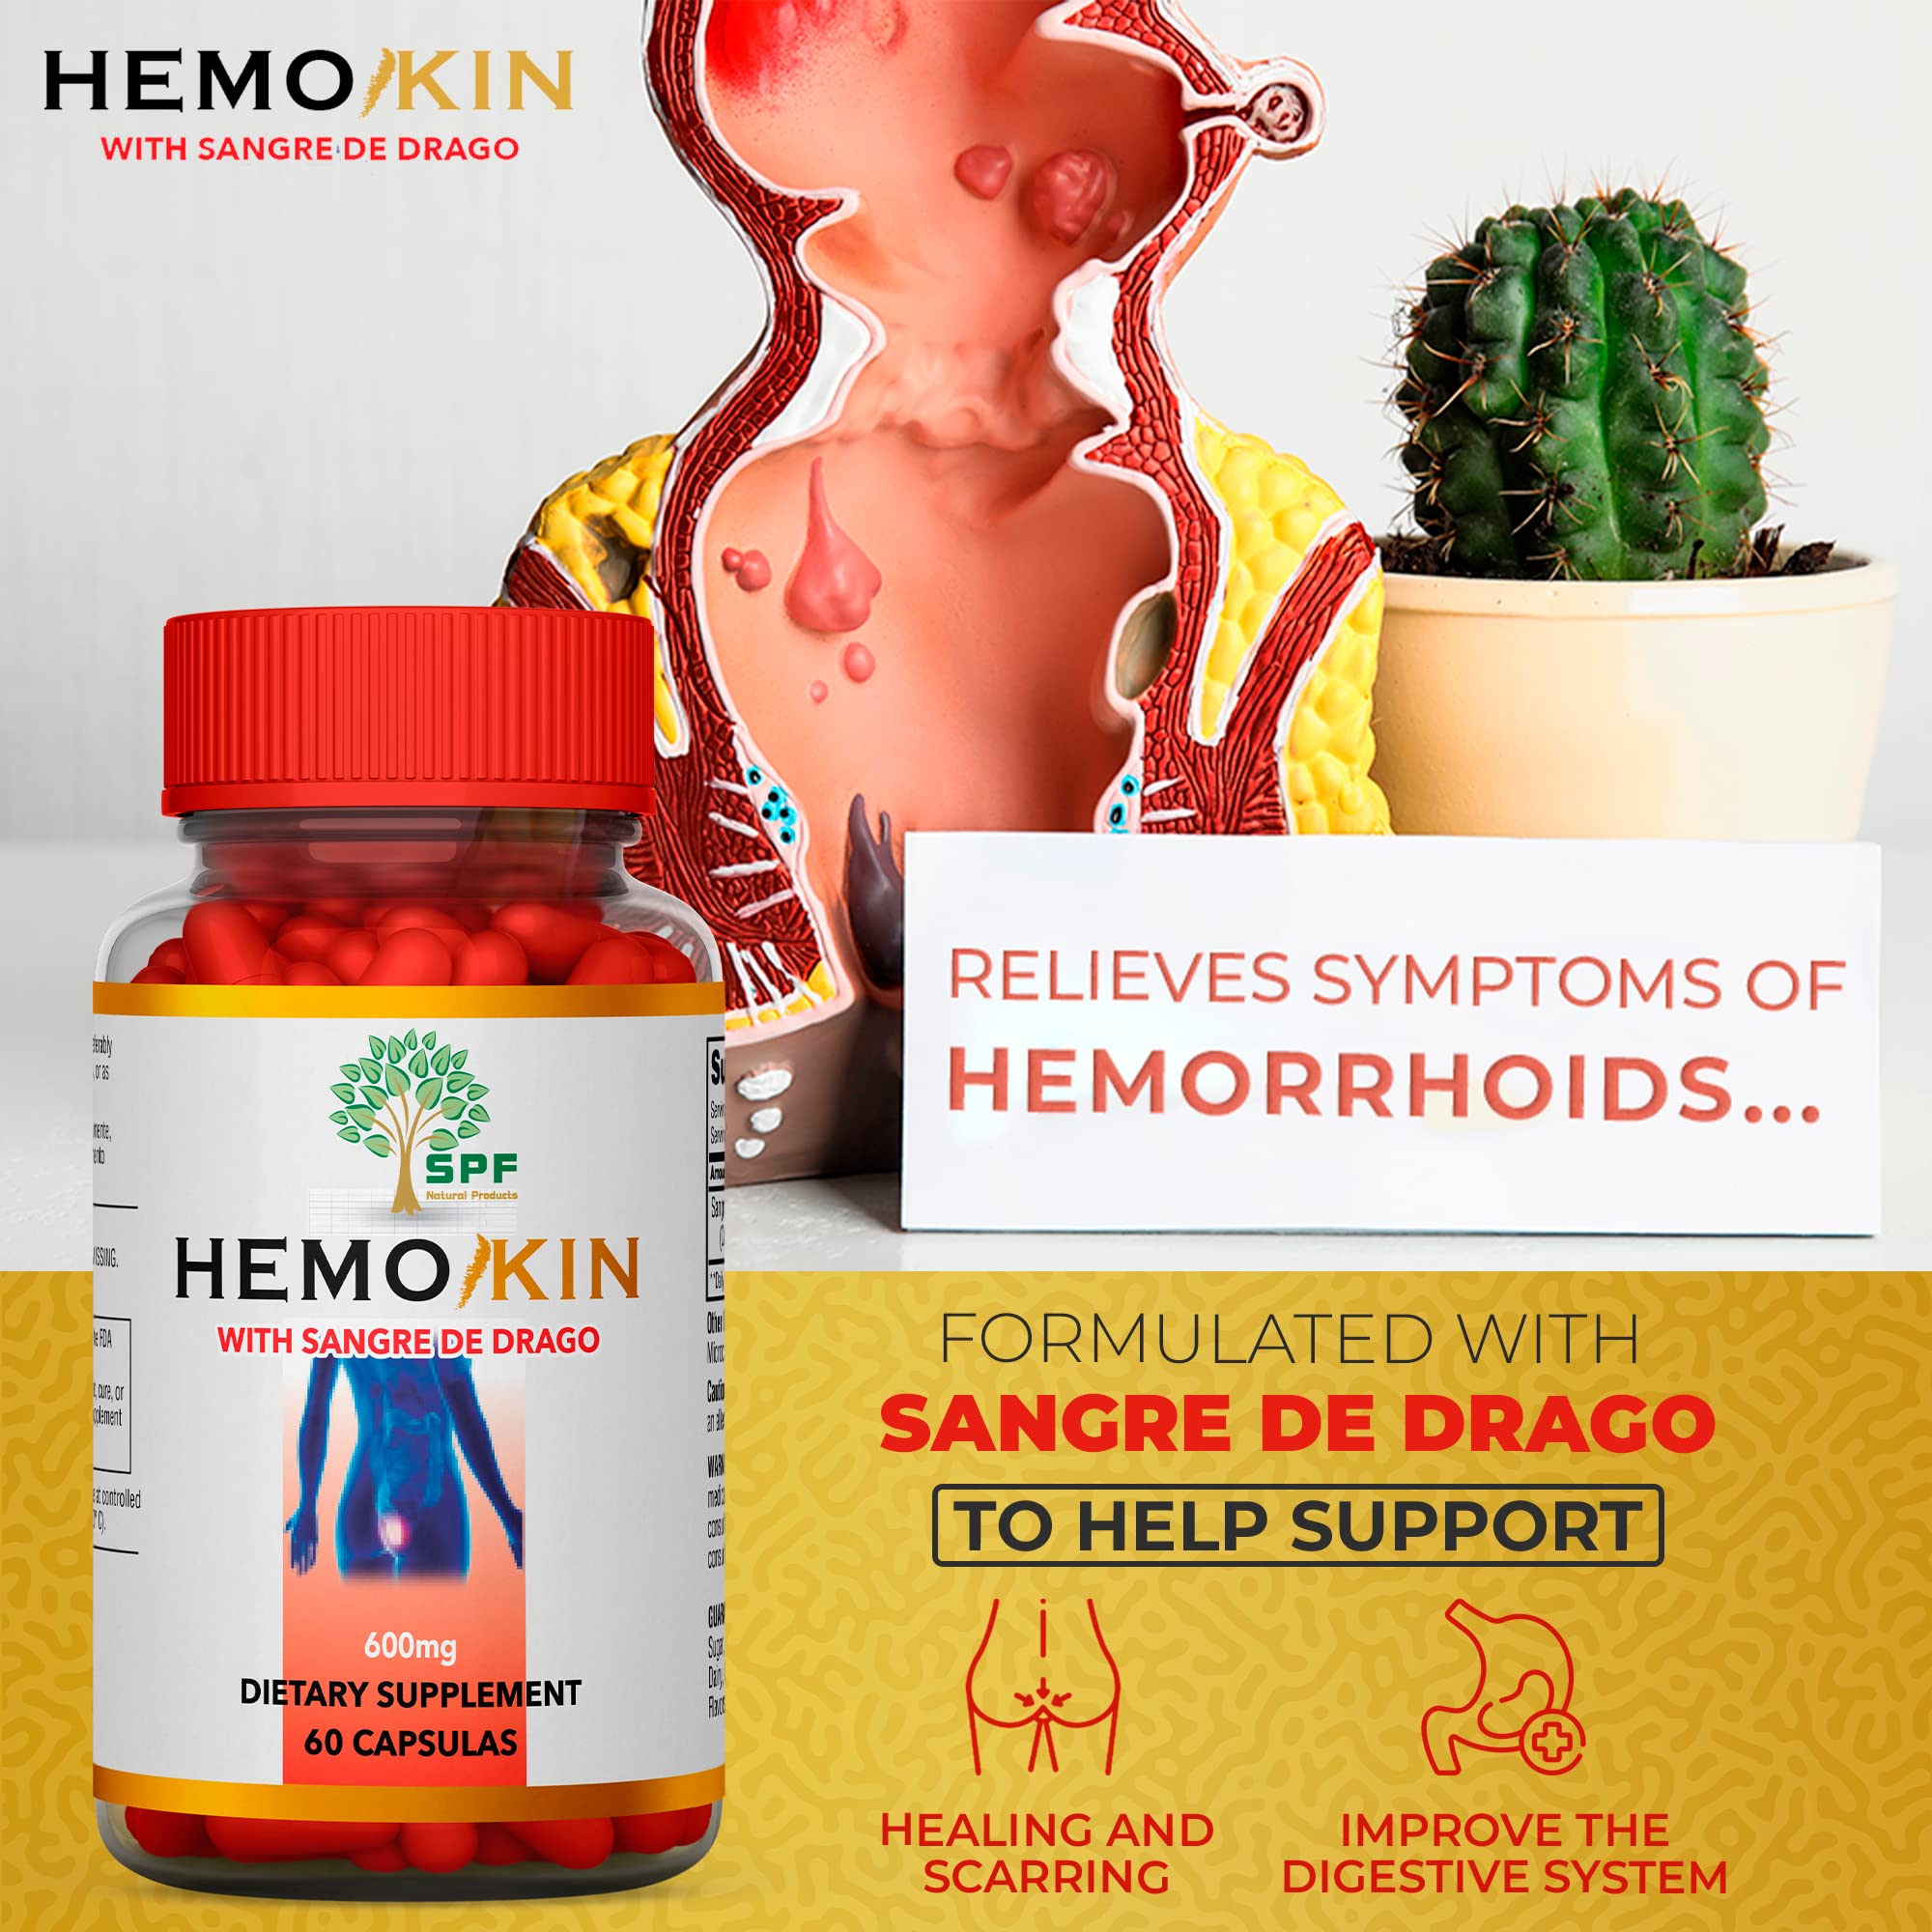 SPF HEMOKIN with Sangre de Drago – Hemorrhoid and Fissure Relief Supplement, Helps with Itching, Swelling (60 Caps) Natural Products. (1)